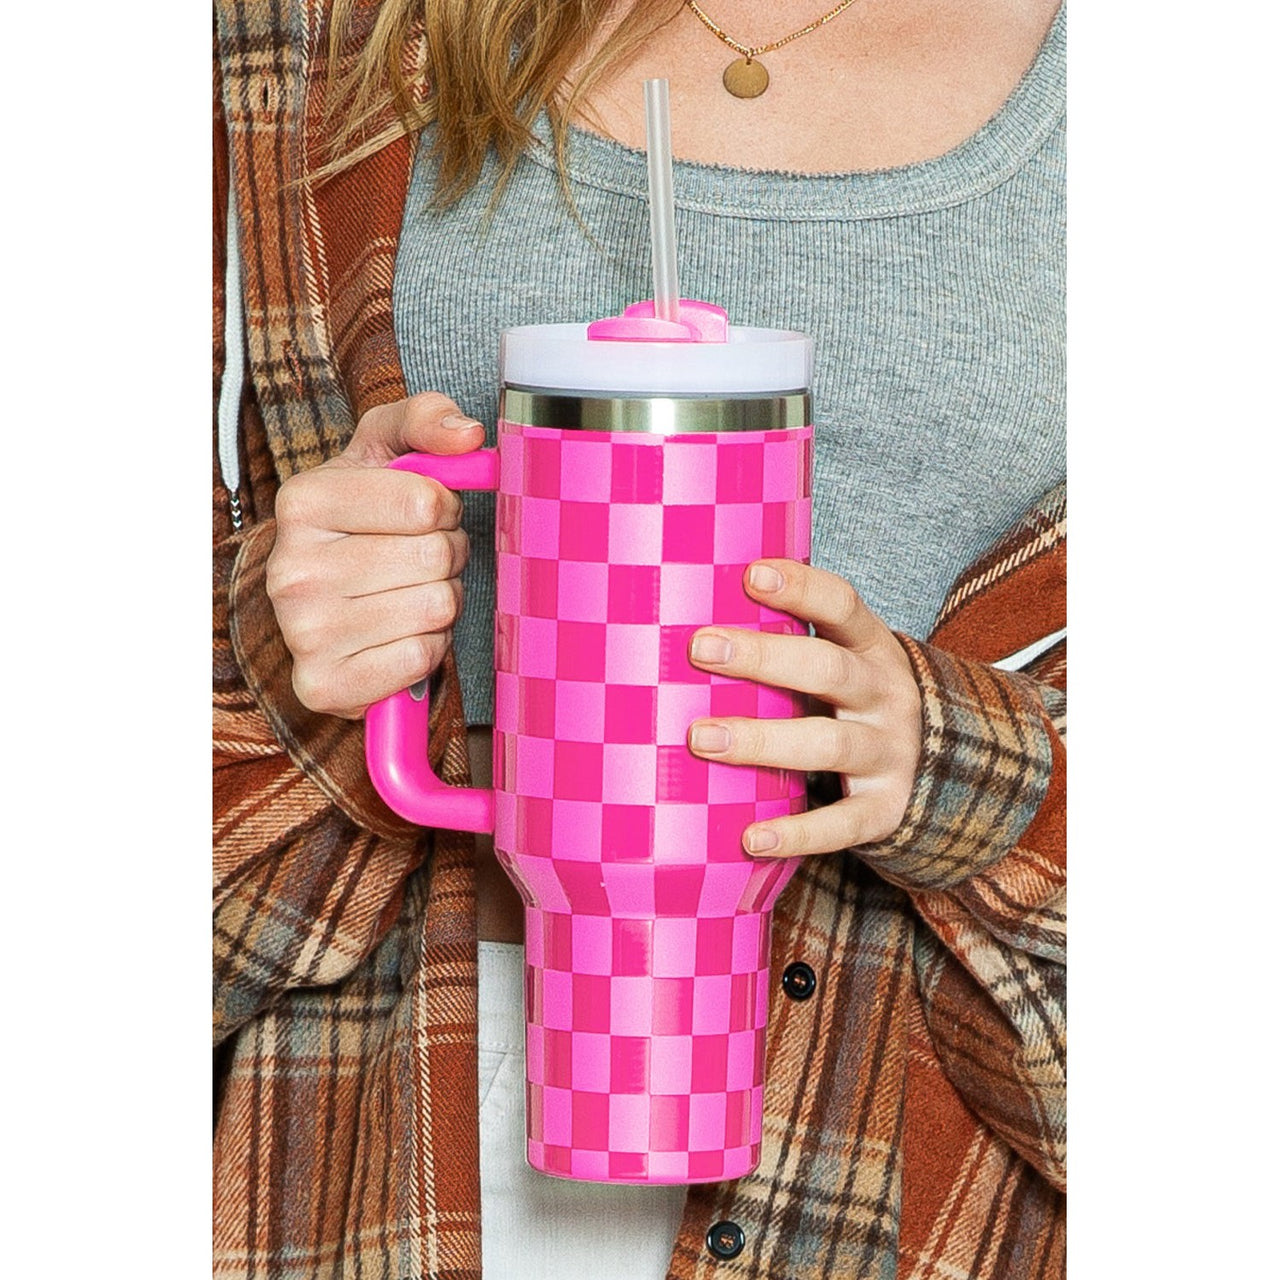 Dear Lover 40oz Checkered Print Handled Stainless Steel Tumbler Cup - Pink